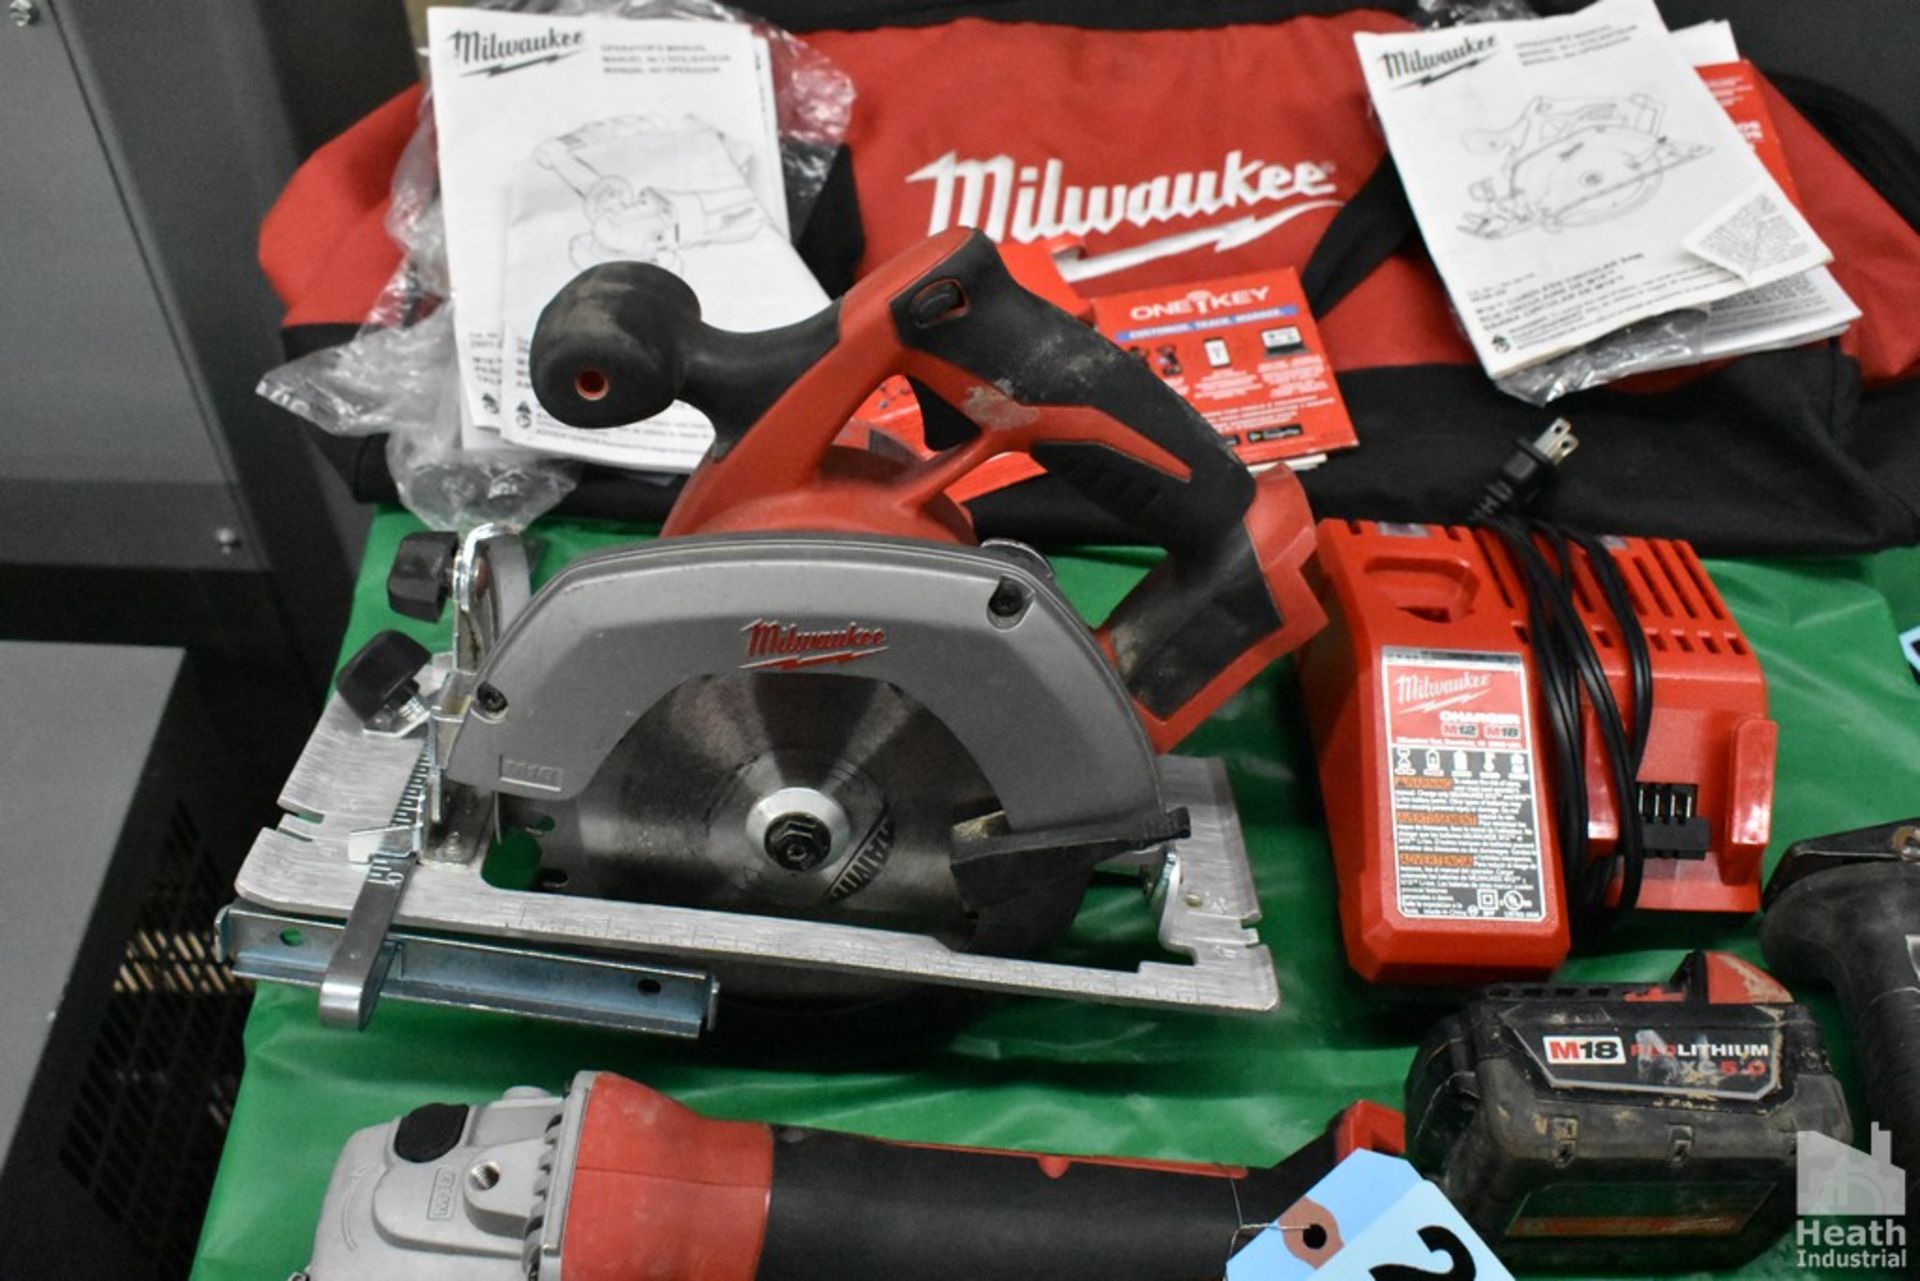 ASSORTED MILWAUKEE TOOLS ON TABLE, WITH CHARGER, BATTERY AND CARRYING BAG - Image 4 of 4